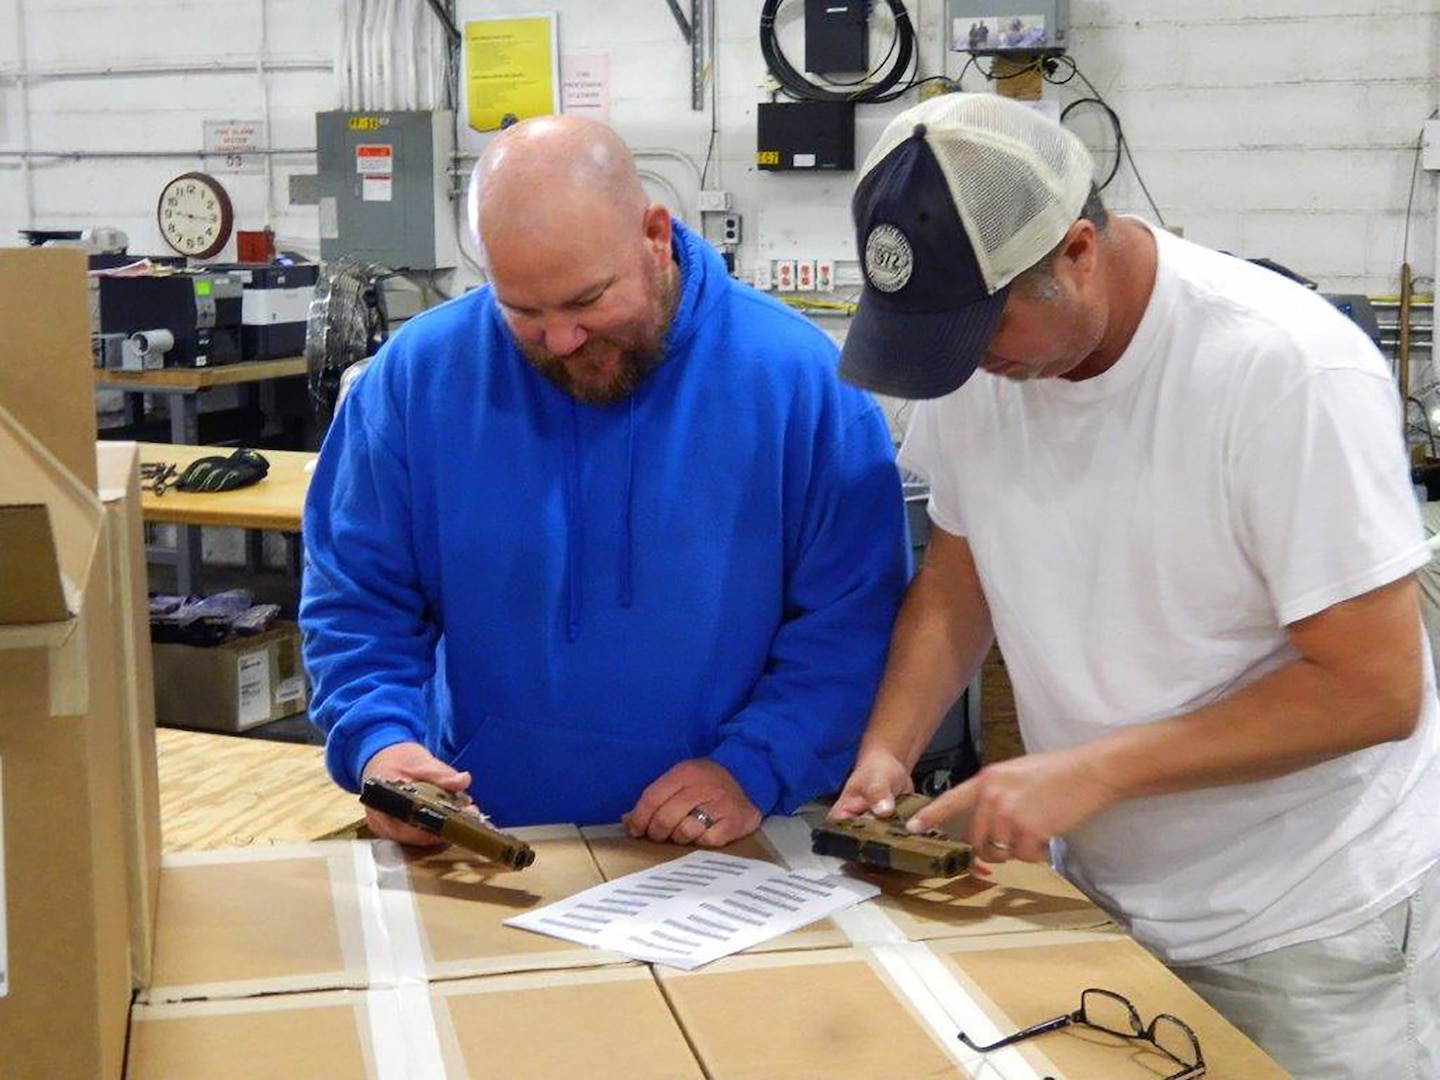 Douglas Wilson (left) and Jarred Slaton, DLA Distribution Anniston, Alabama, warehouse packers, verify the correct stock numbers with the weapons prior to packing.